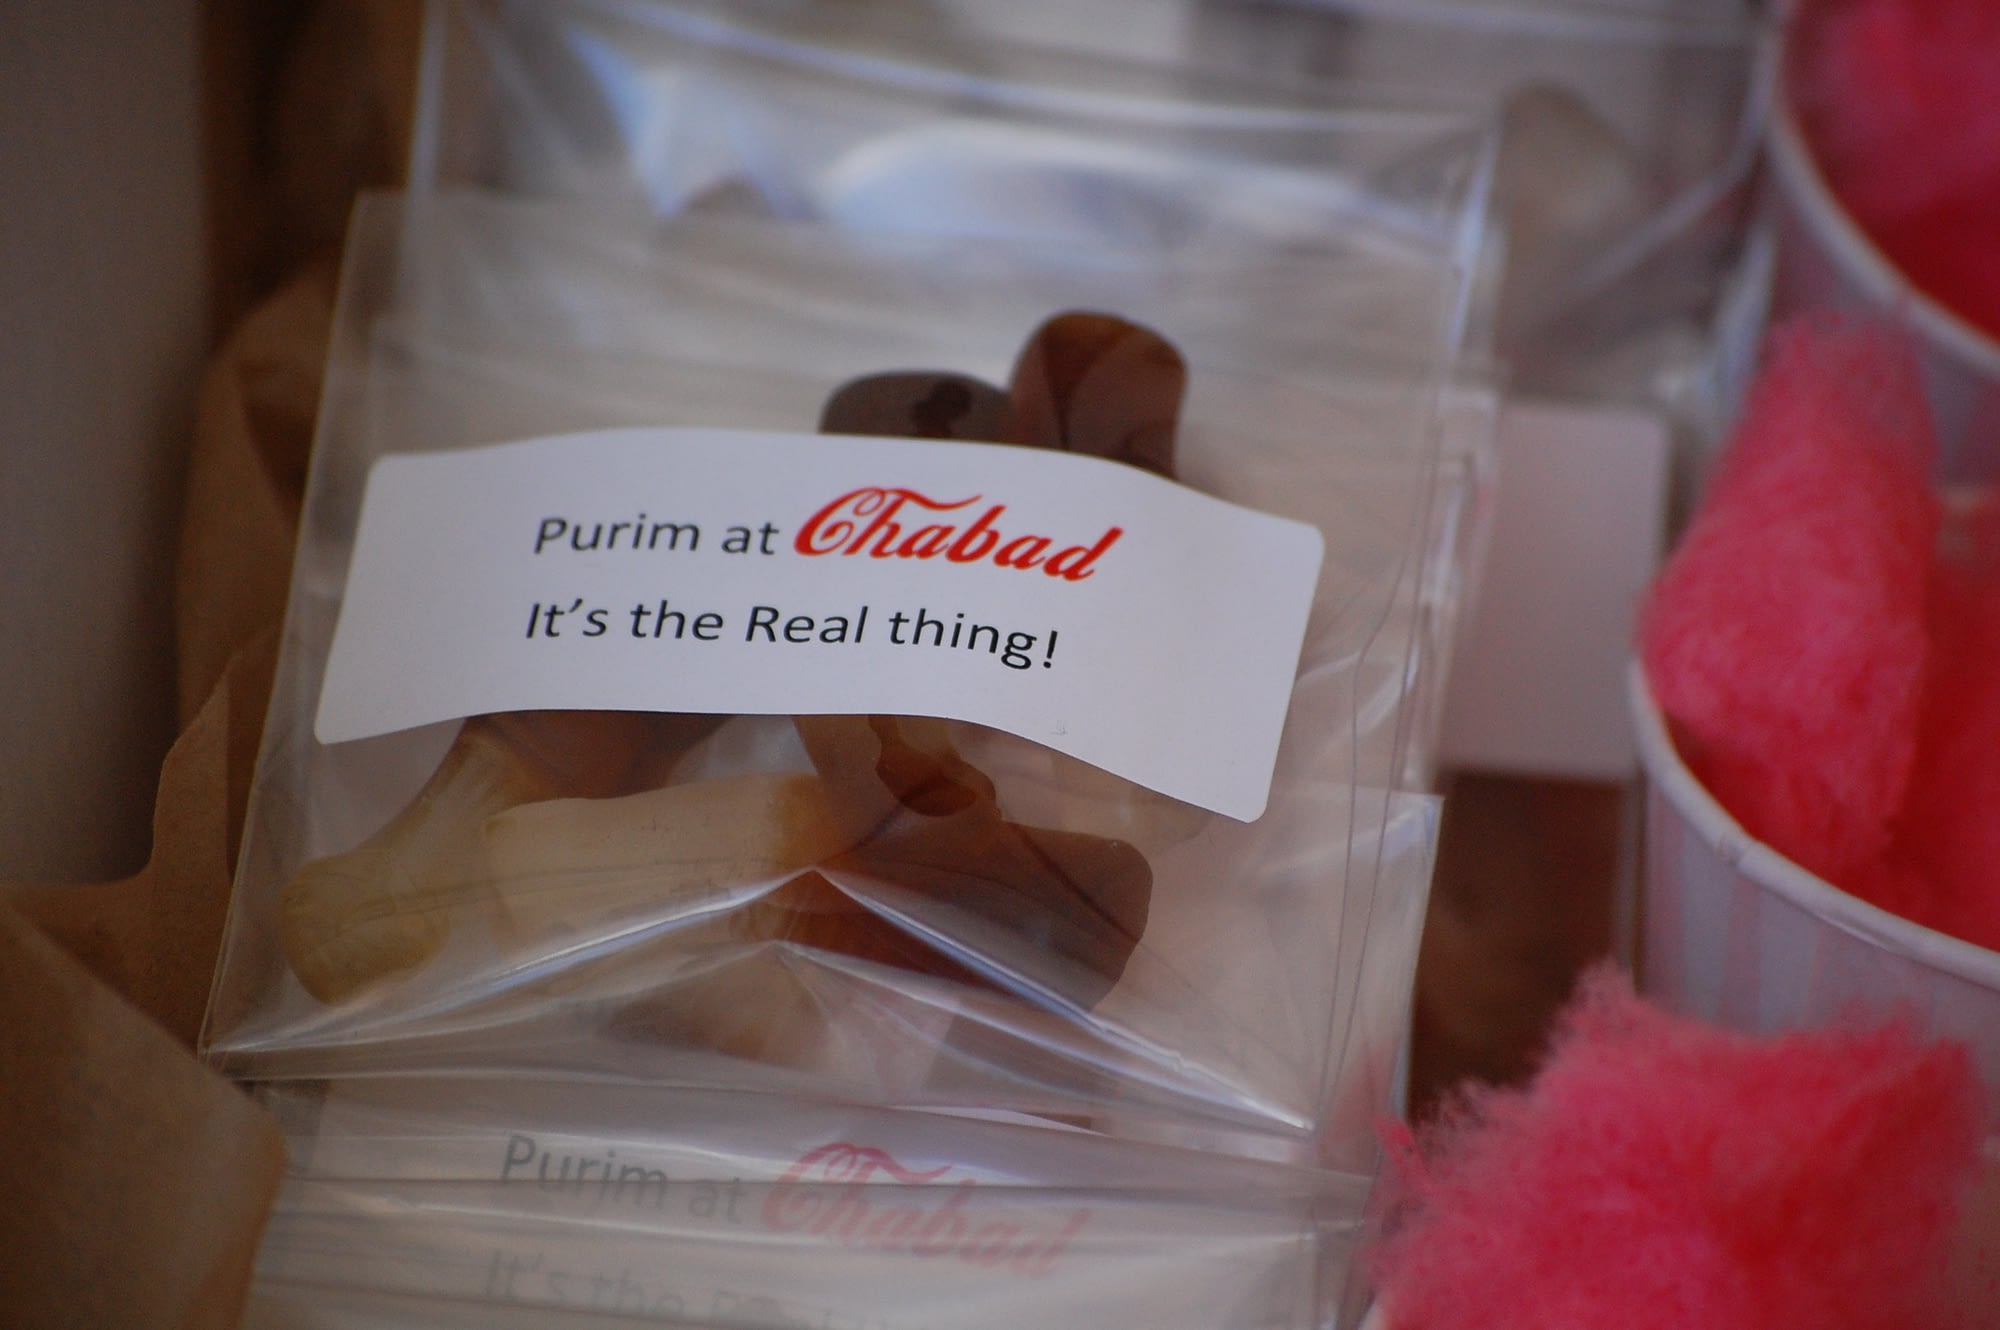 Place a few gummies in a small clear bag and print address lables that say "Purim at Chabad...It's the real thing!".